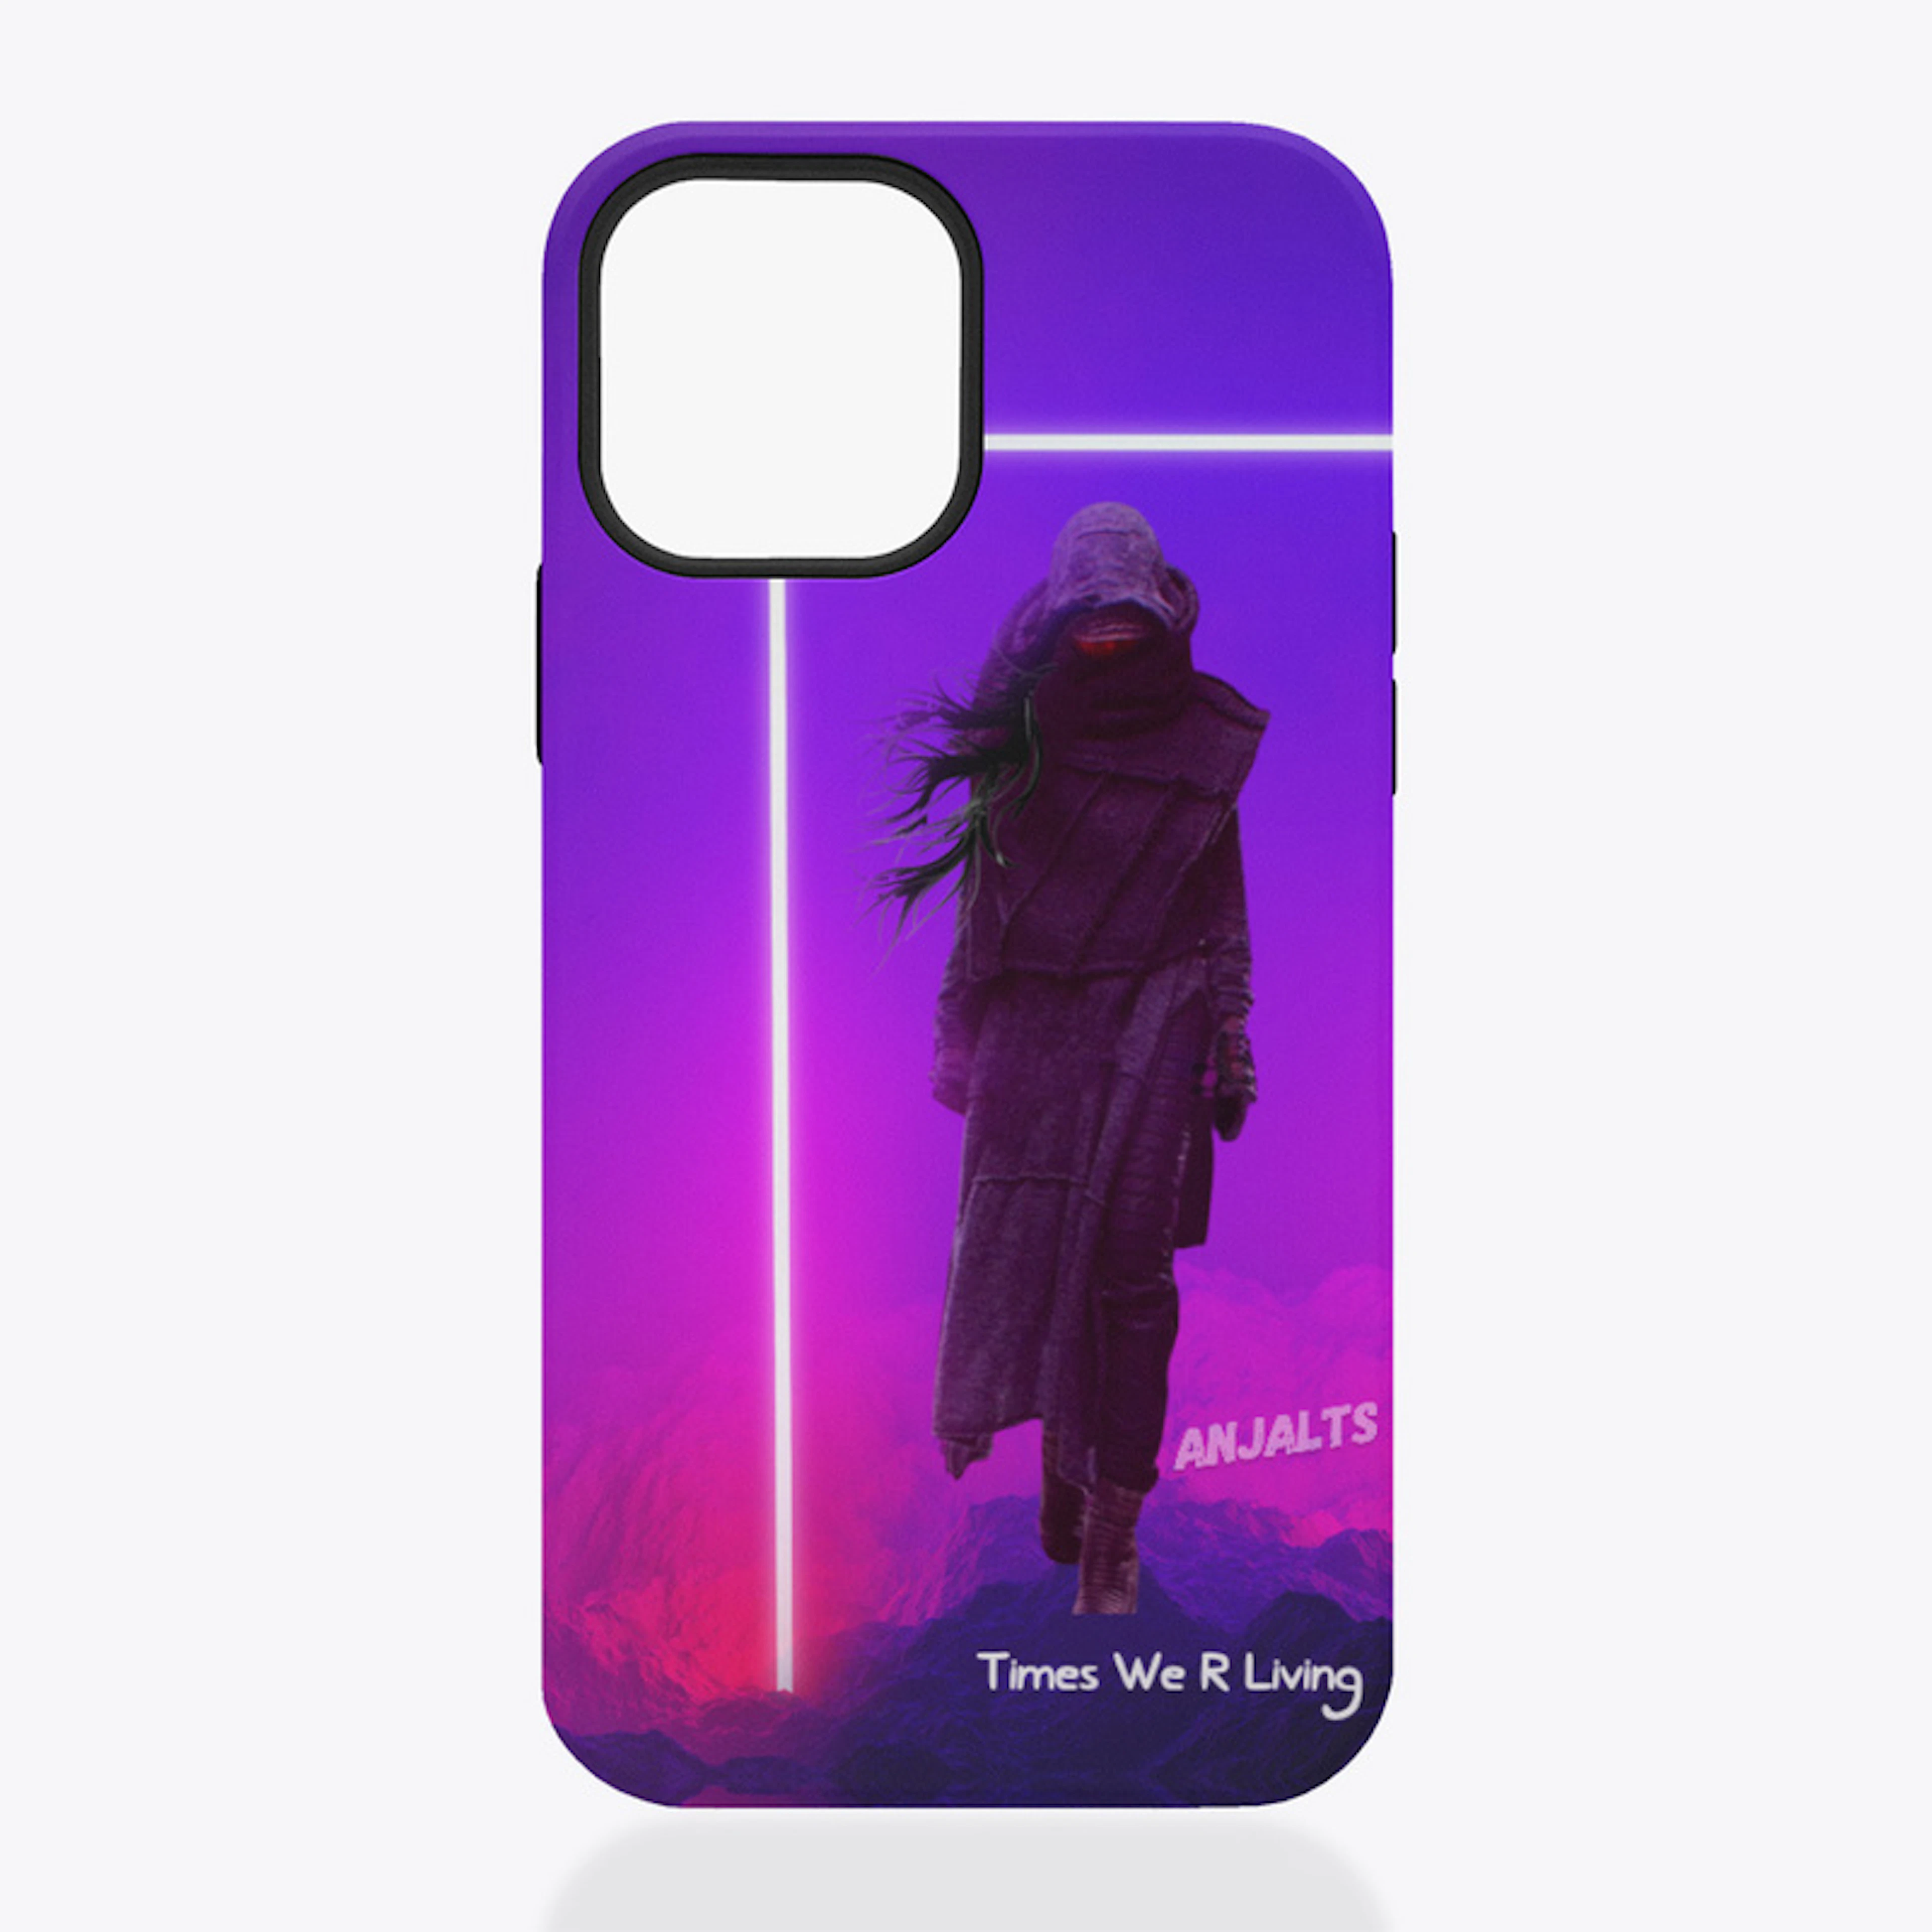 iPhone Case - Times We R Living